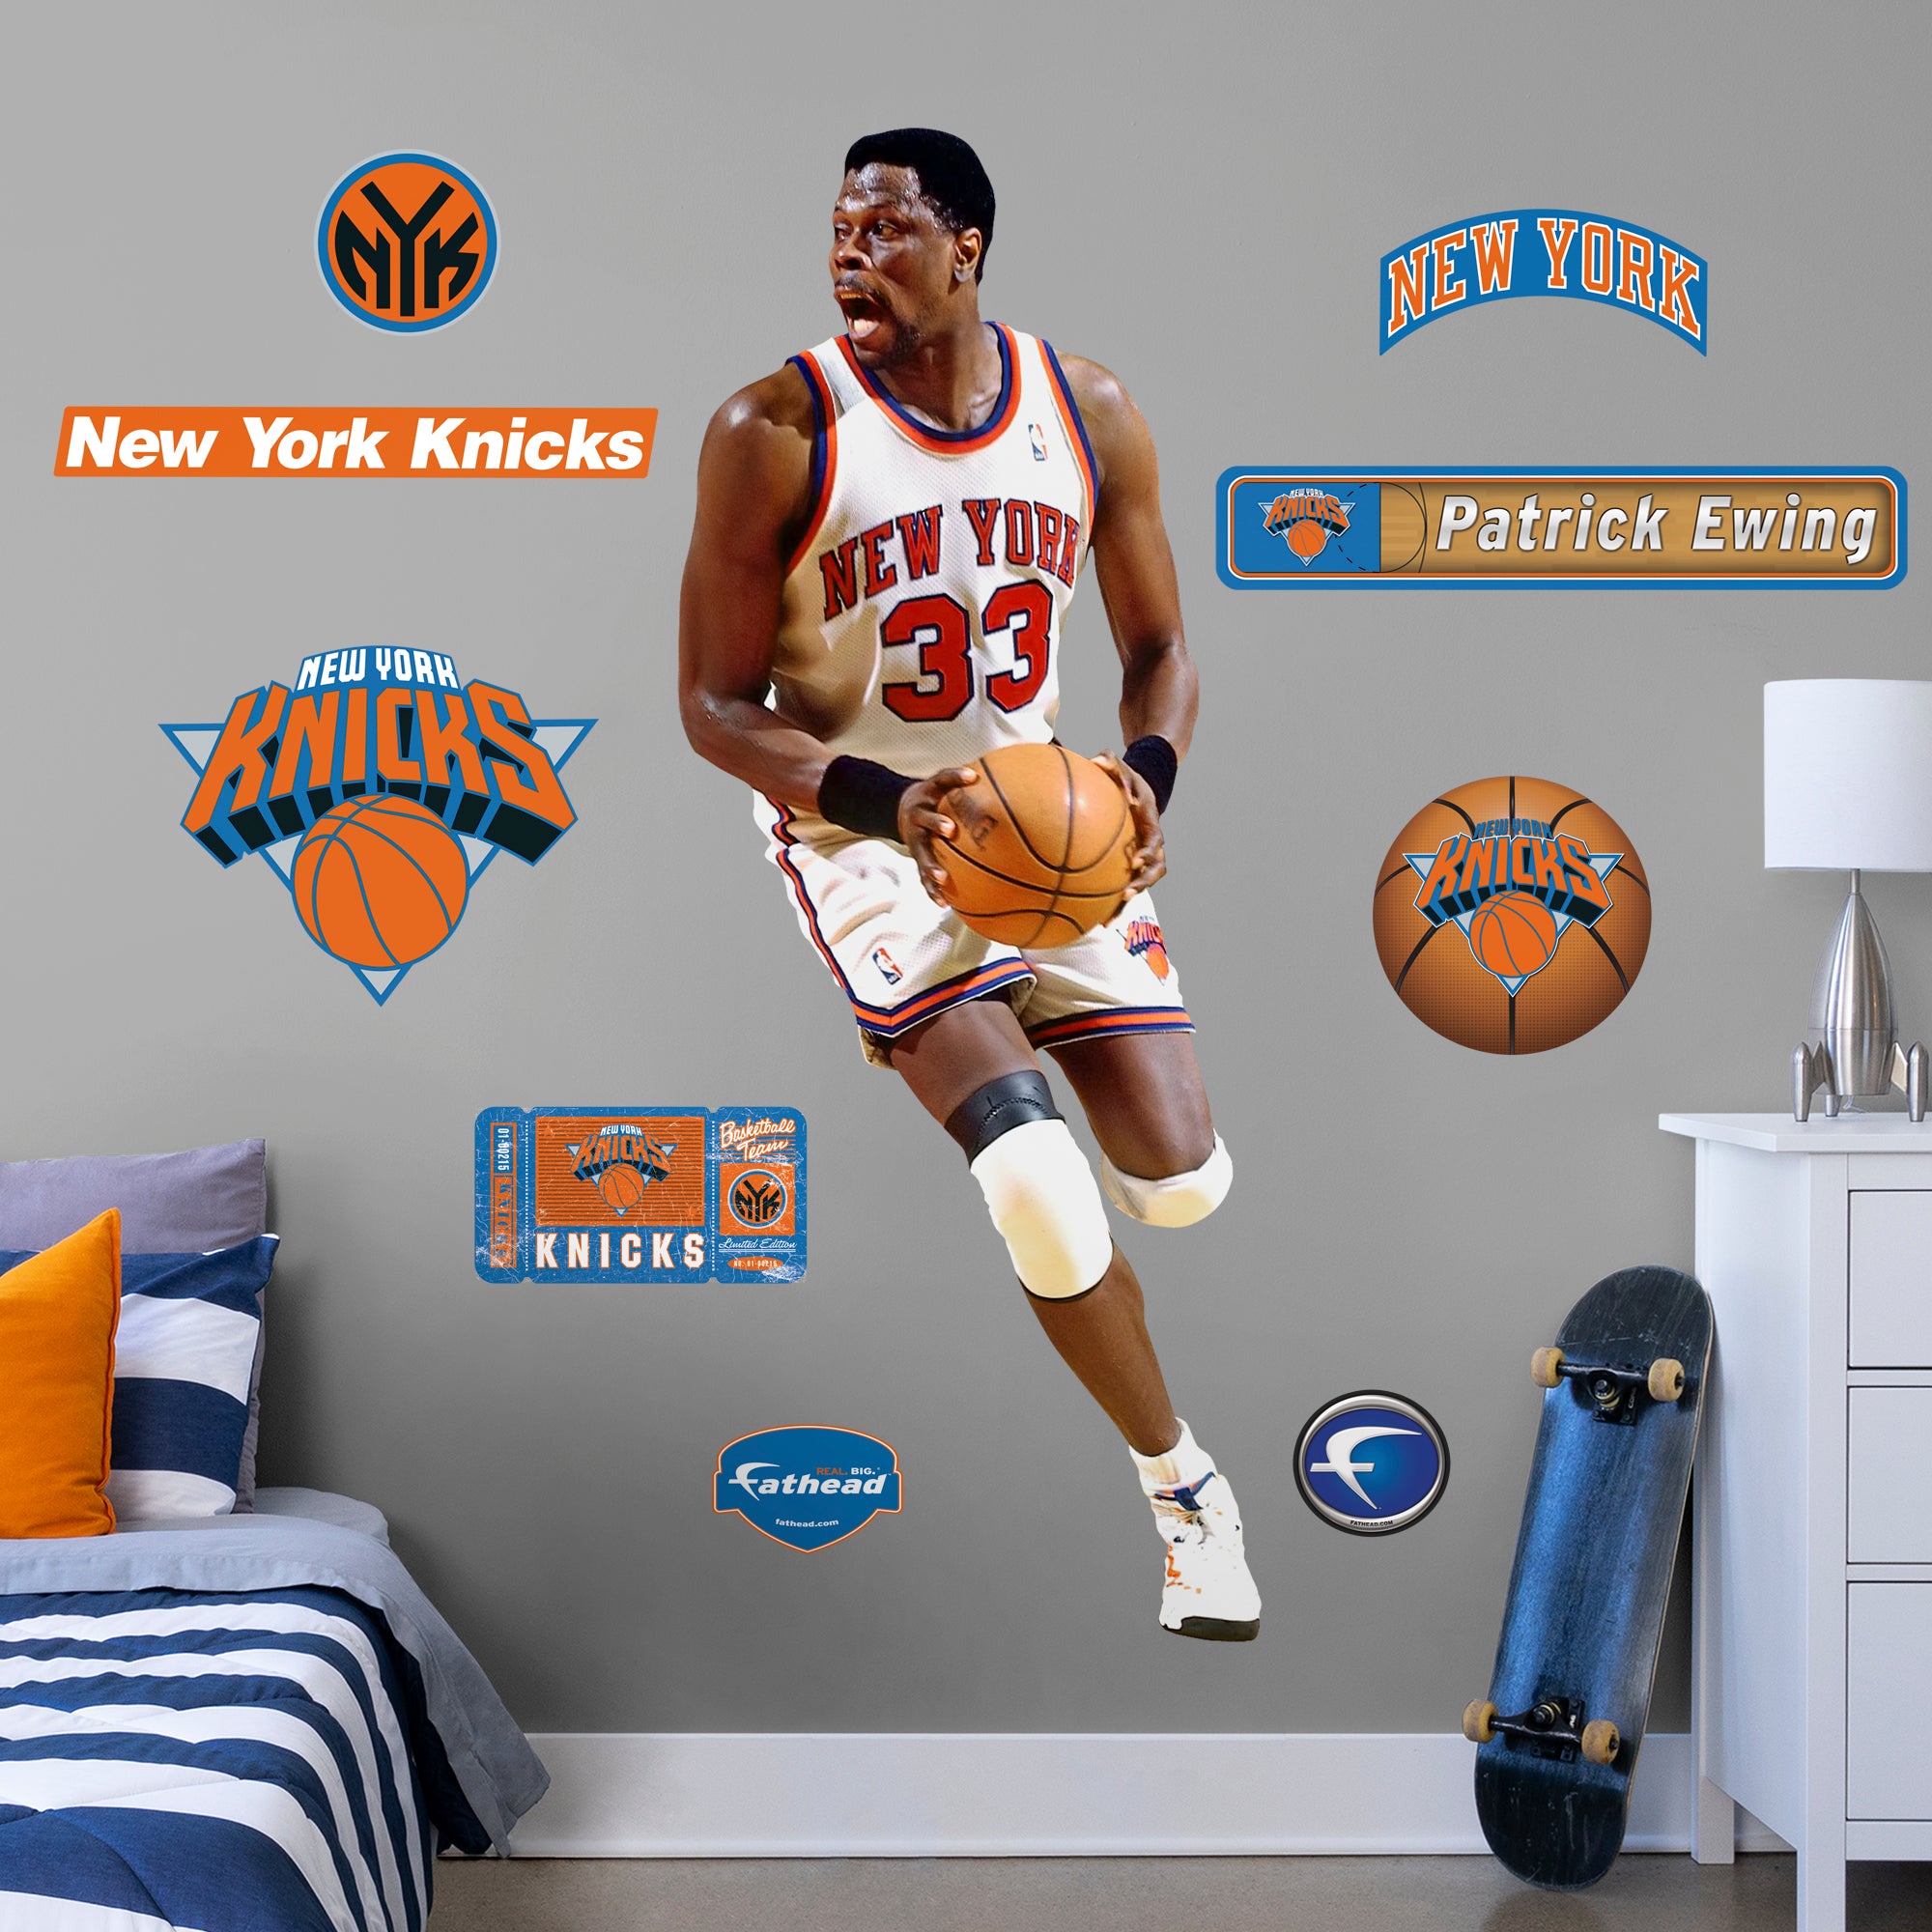 Patrick Ewing Legend - Officially Licensed NBA Removable Wall